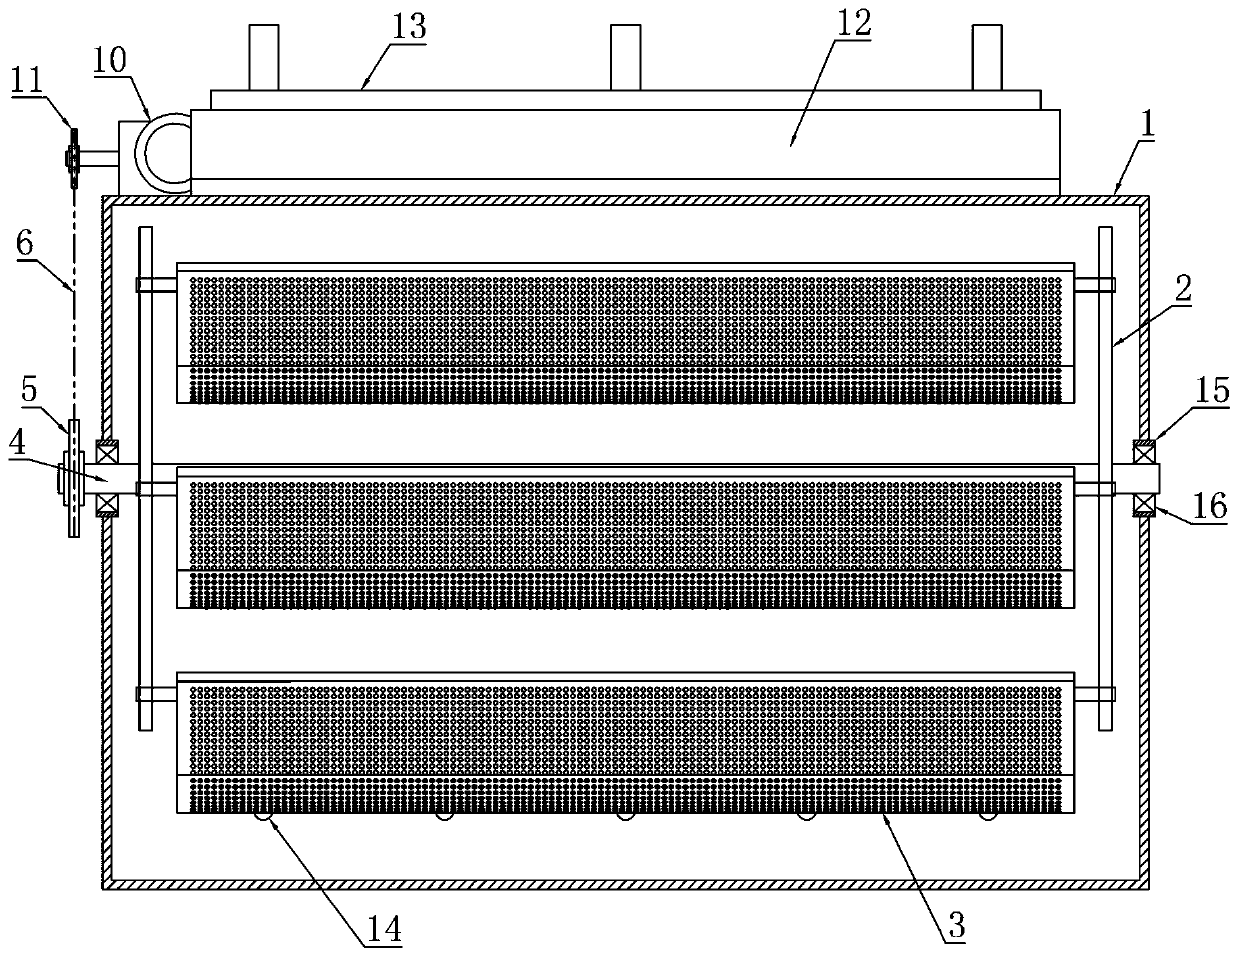 Vegetable dehydrating and drying device